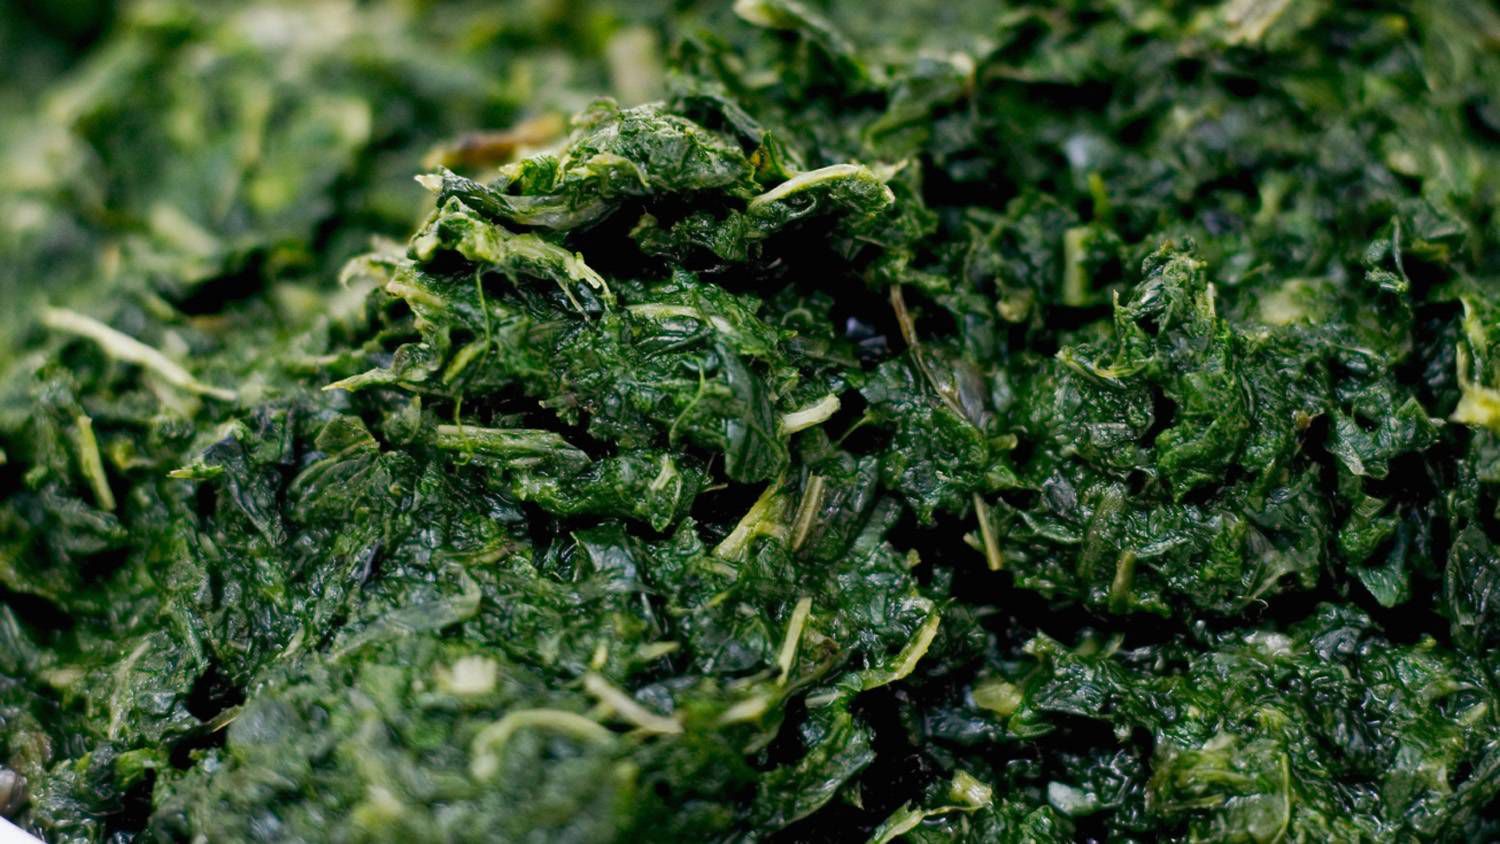 cooked kale